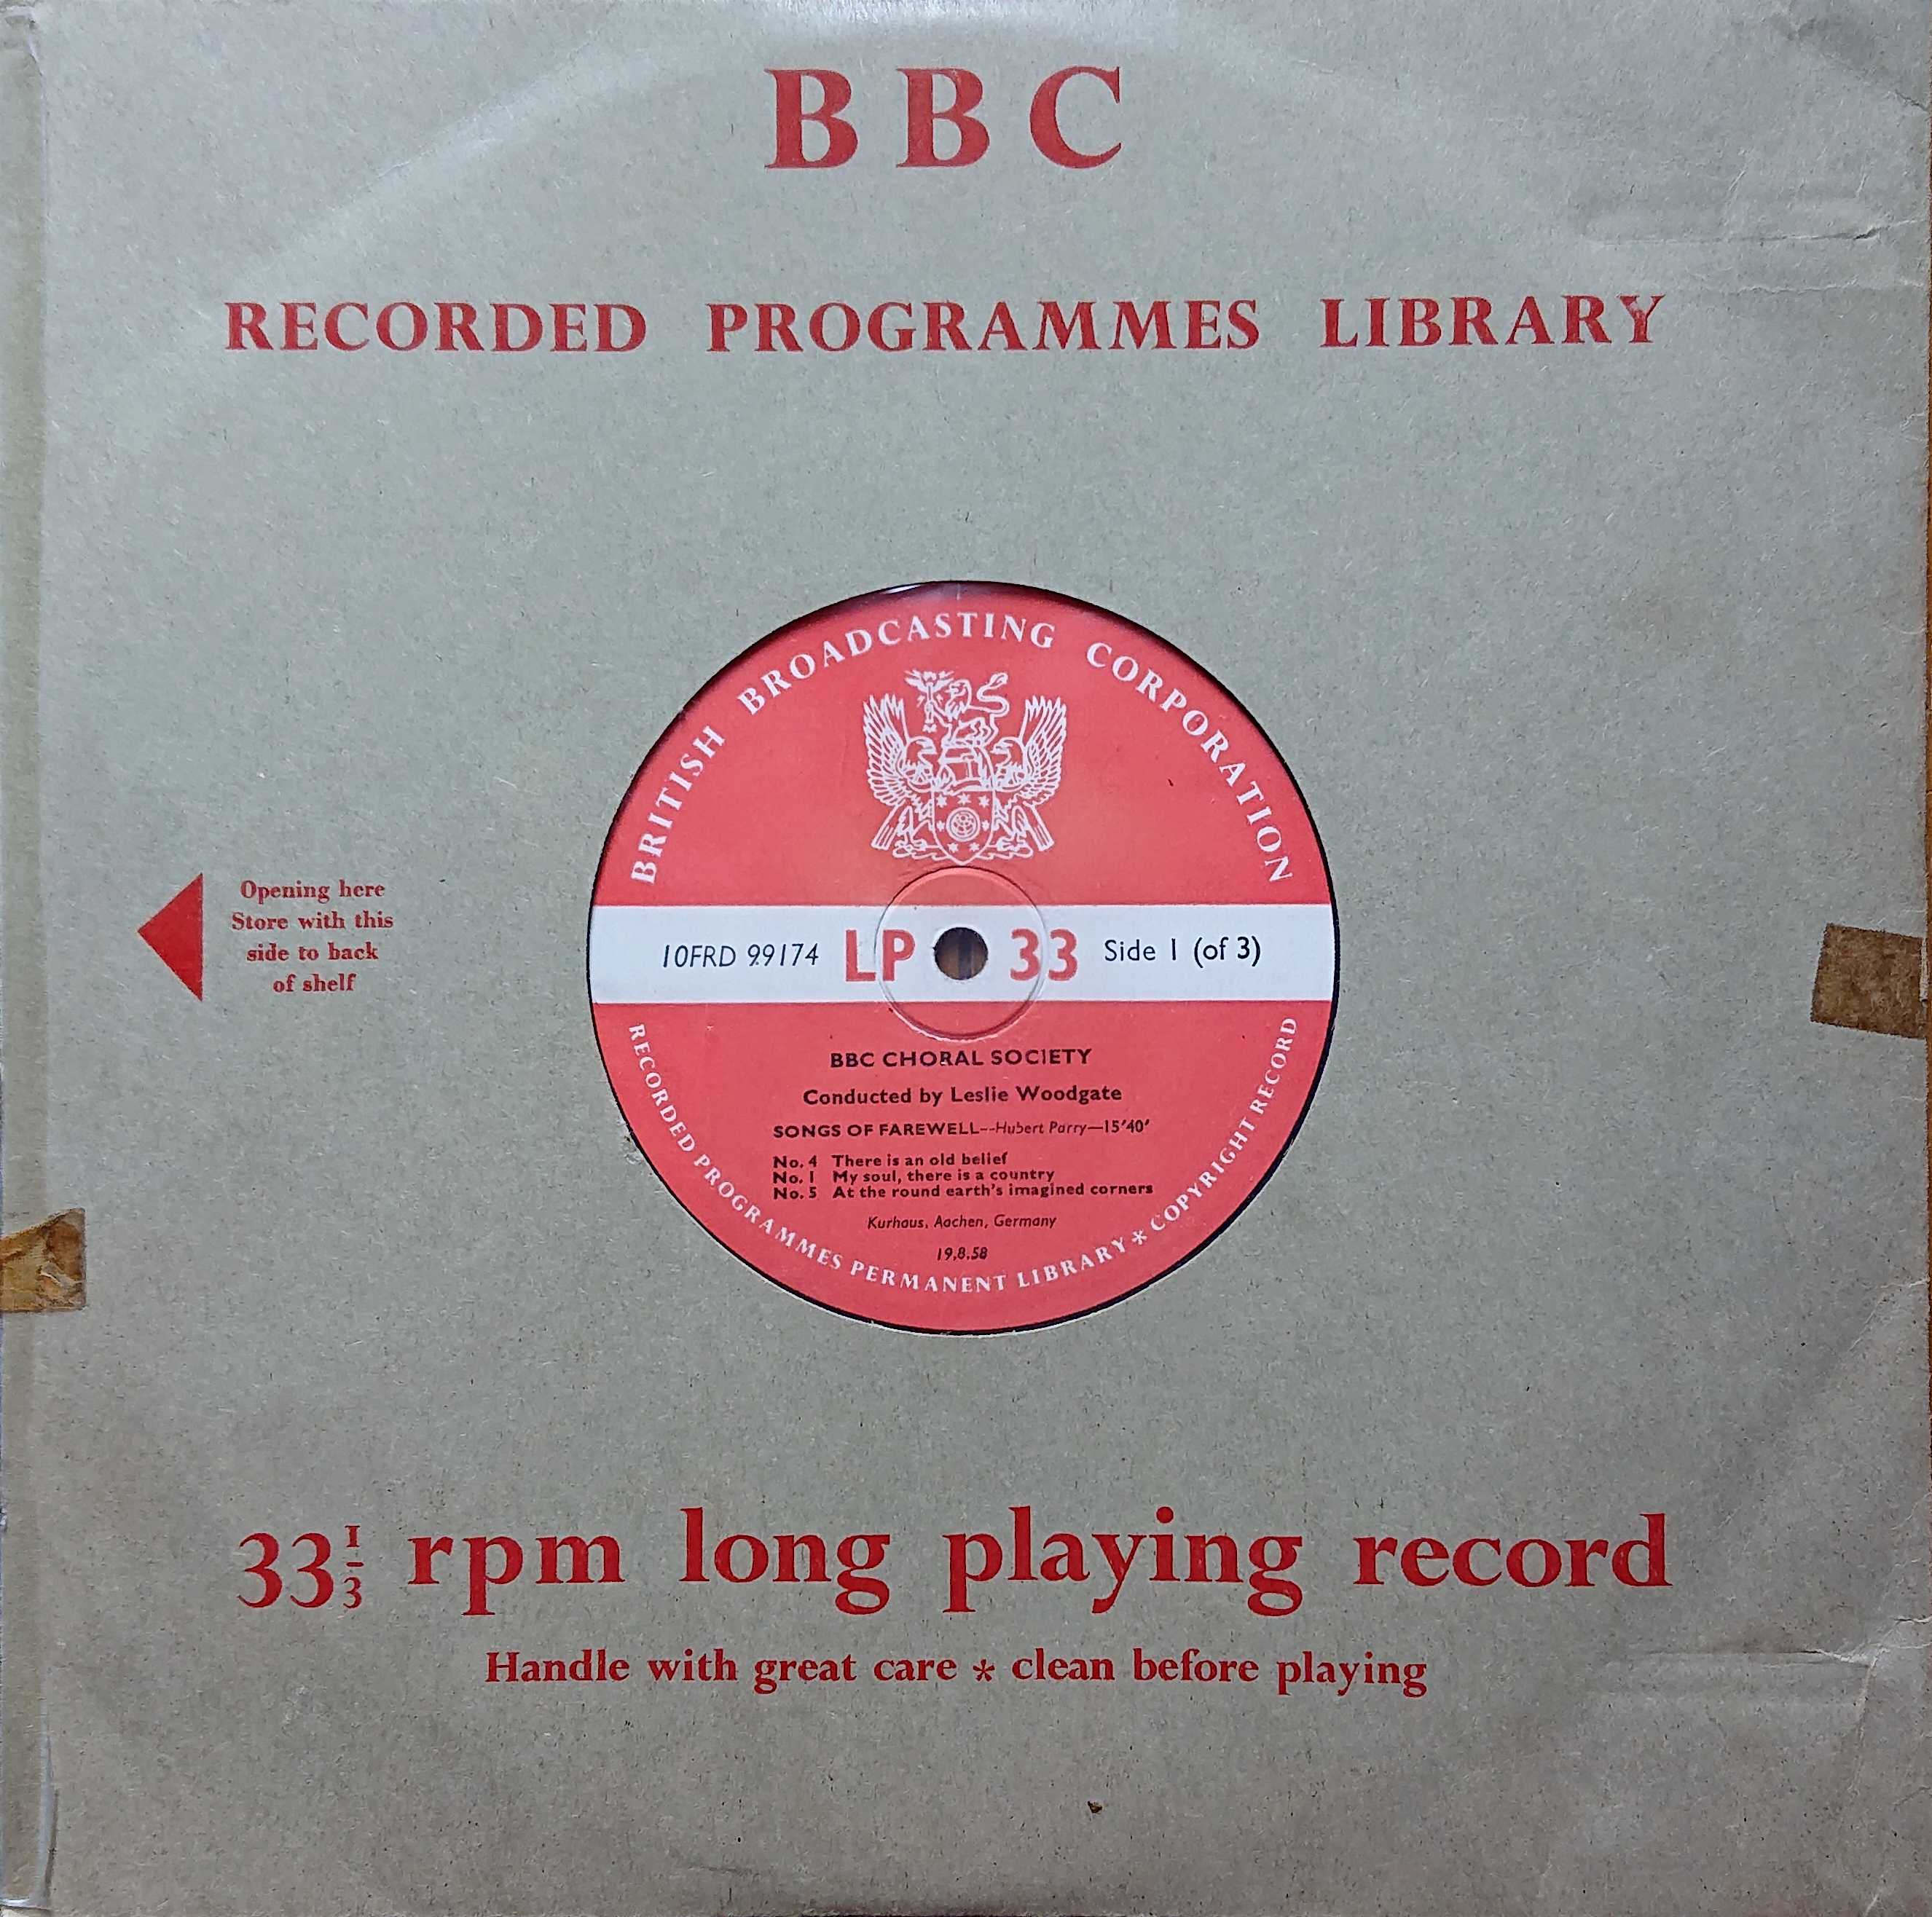 Picture of BBC Choral Society by artist Hubert Parry Samuel Wesley / Arnold Bax from the BBC 10inches - Records and Tapes library